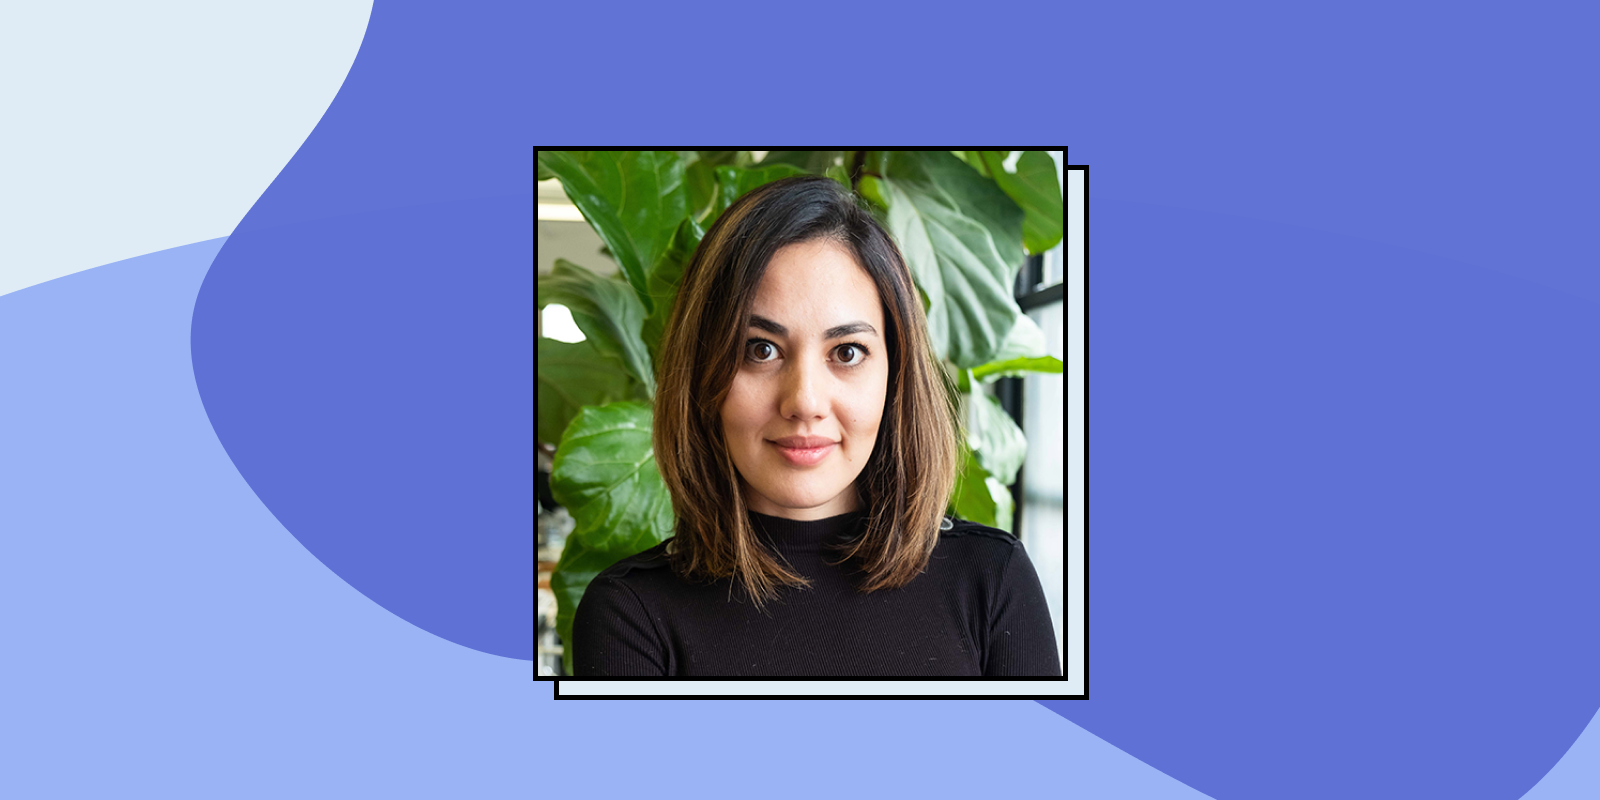 Meet the Team: Q&A with Product Manager, Luiza Sabirova